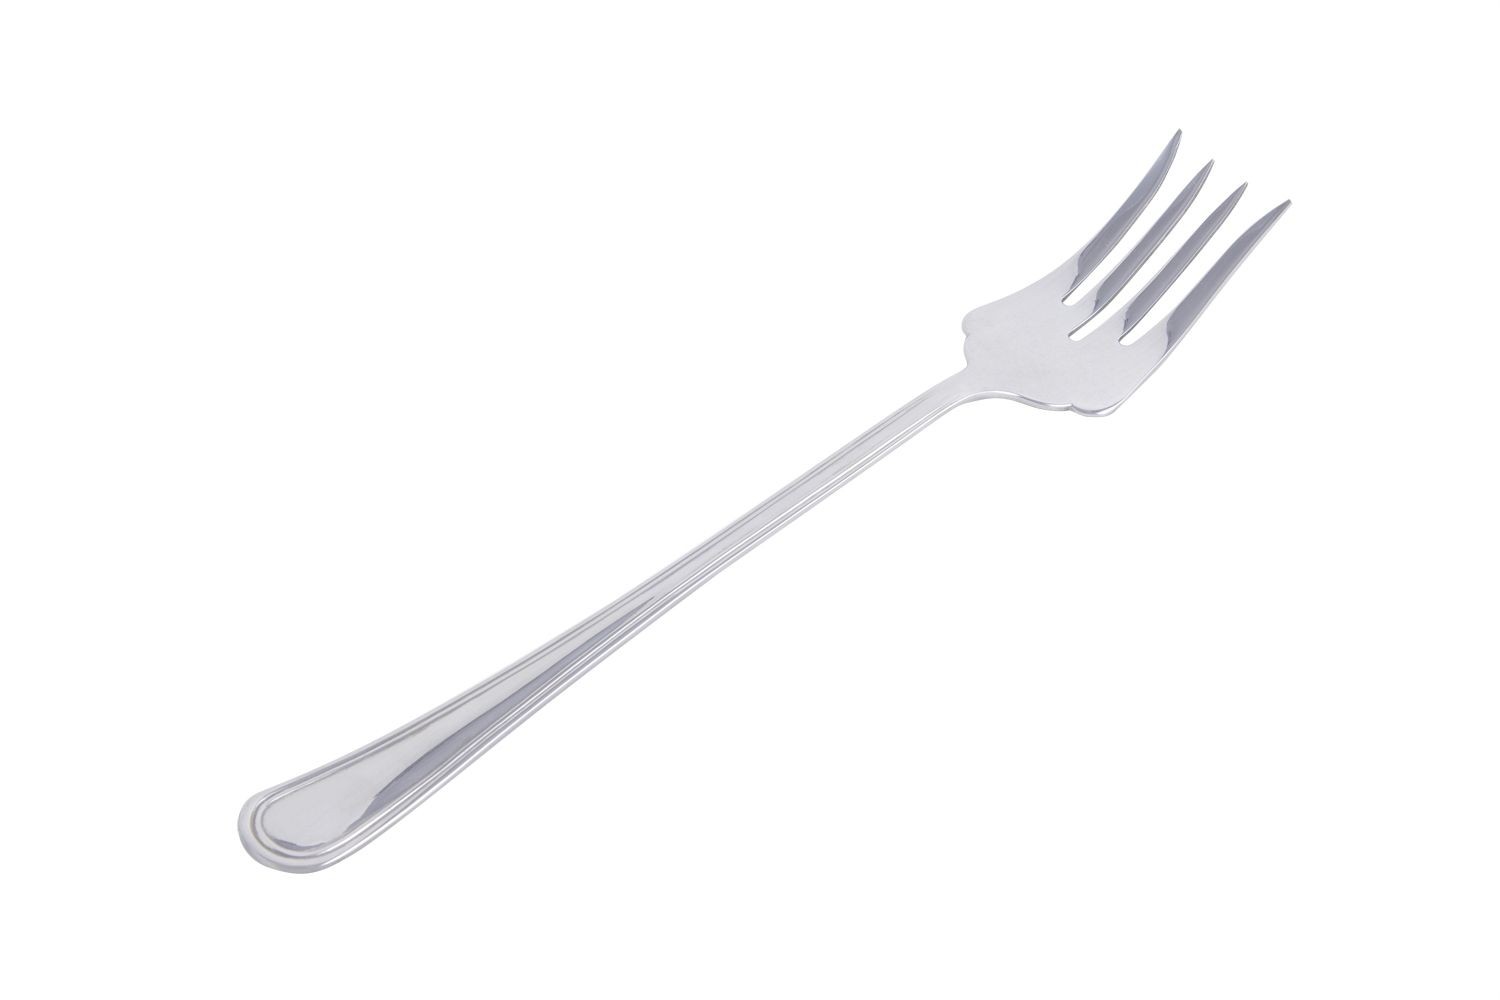 Bon Chef 9453 Stainless Steel Banquet Serving Fork for Meat, 12 1/2"